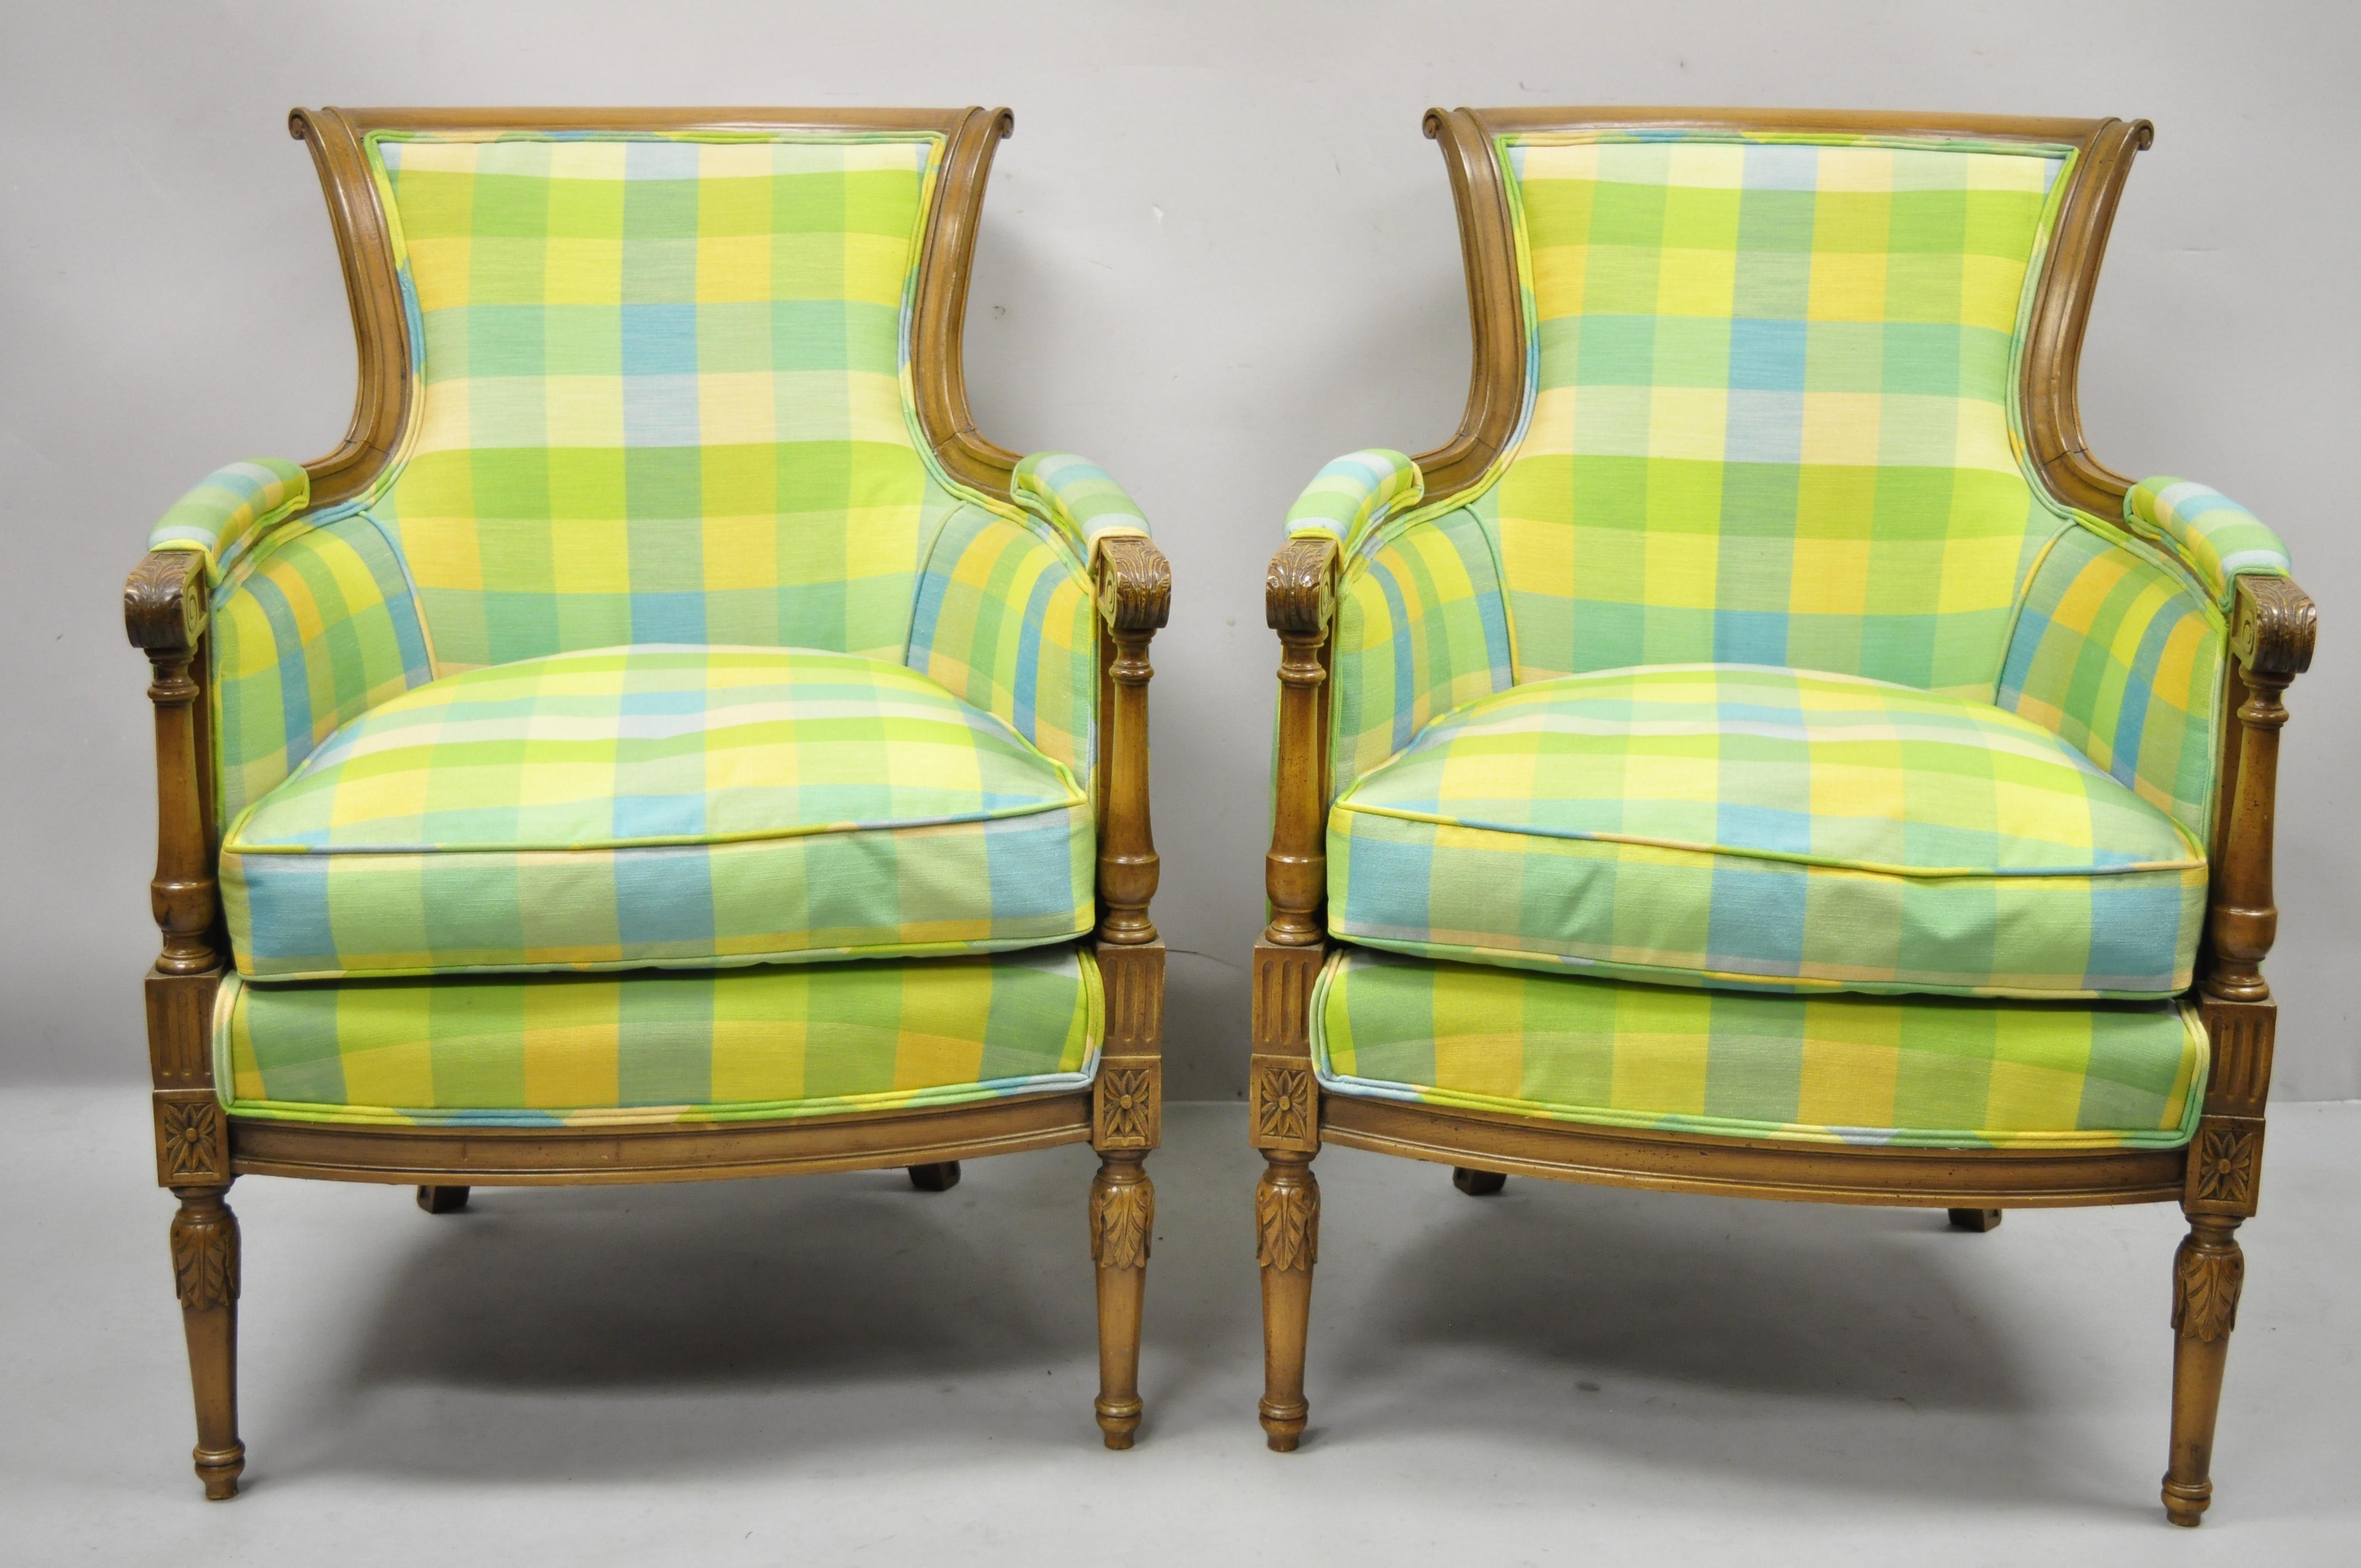 Vintage French Louis XVI Empire Directoire style green plaid bergère lounge arm chairs, a pair. Item features green, blue, and yellow plaid upholstery, curved back, solid wood construction, beautiful wood grain, tapered legs, very nice vintage pair,